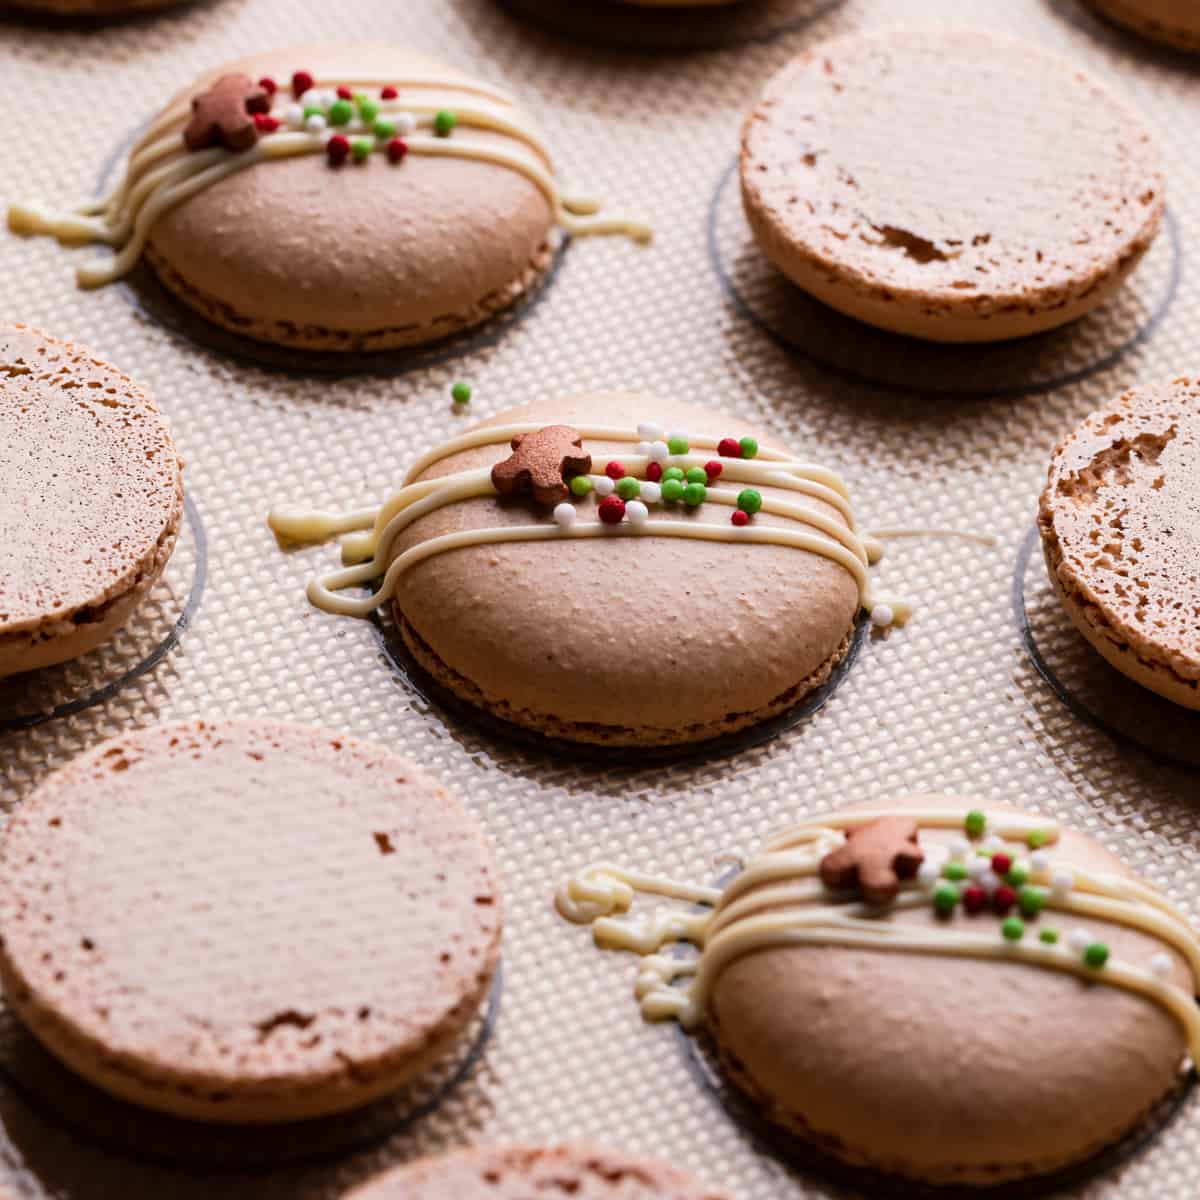 ginger macaron shells drizzled with white chocolate and festive sprinkles.